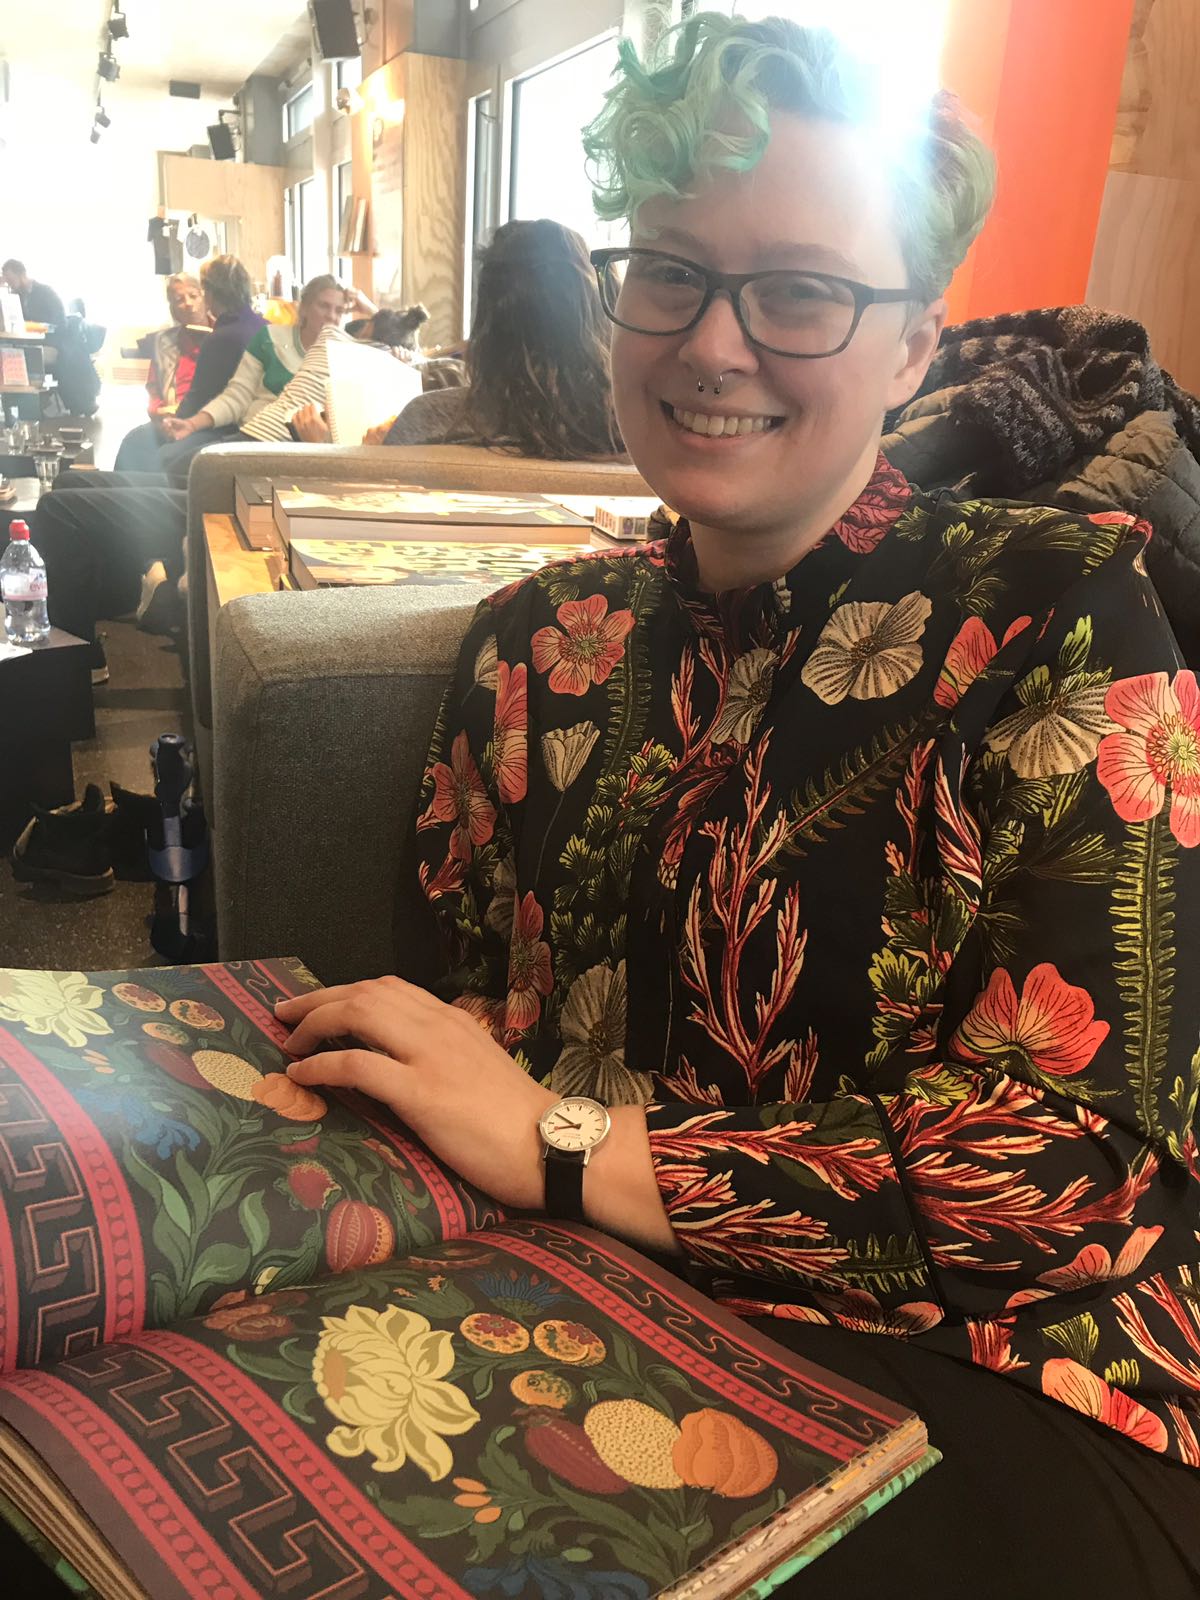 A person wearing a dark shirt with large green, white and red flowers printed on it, holding a book open to a very similar wallpaper design.